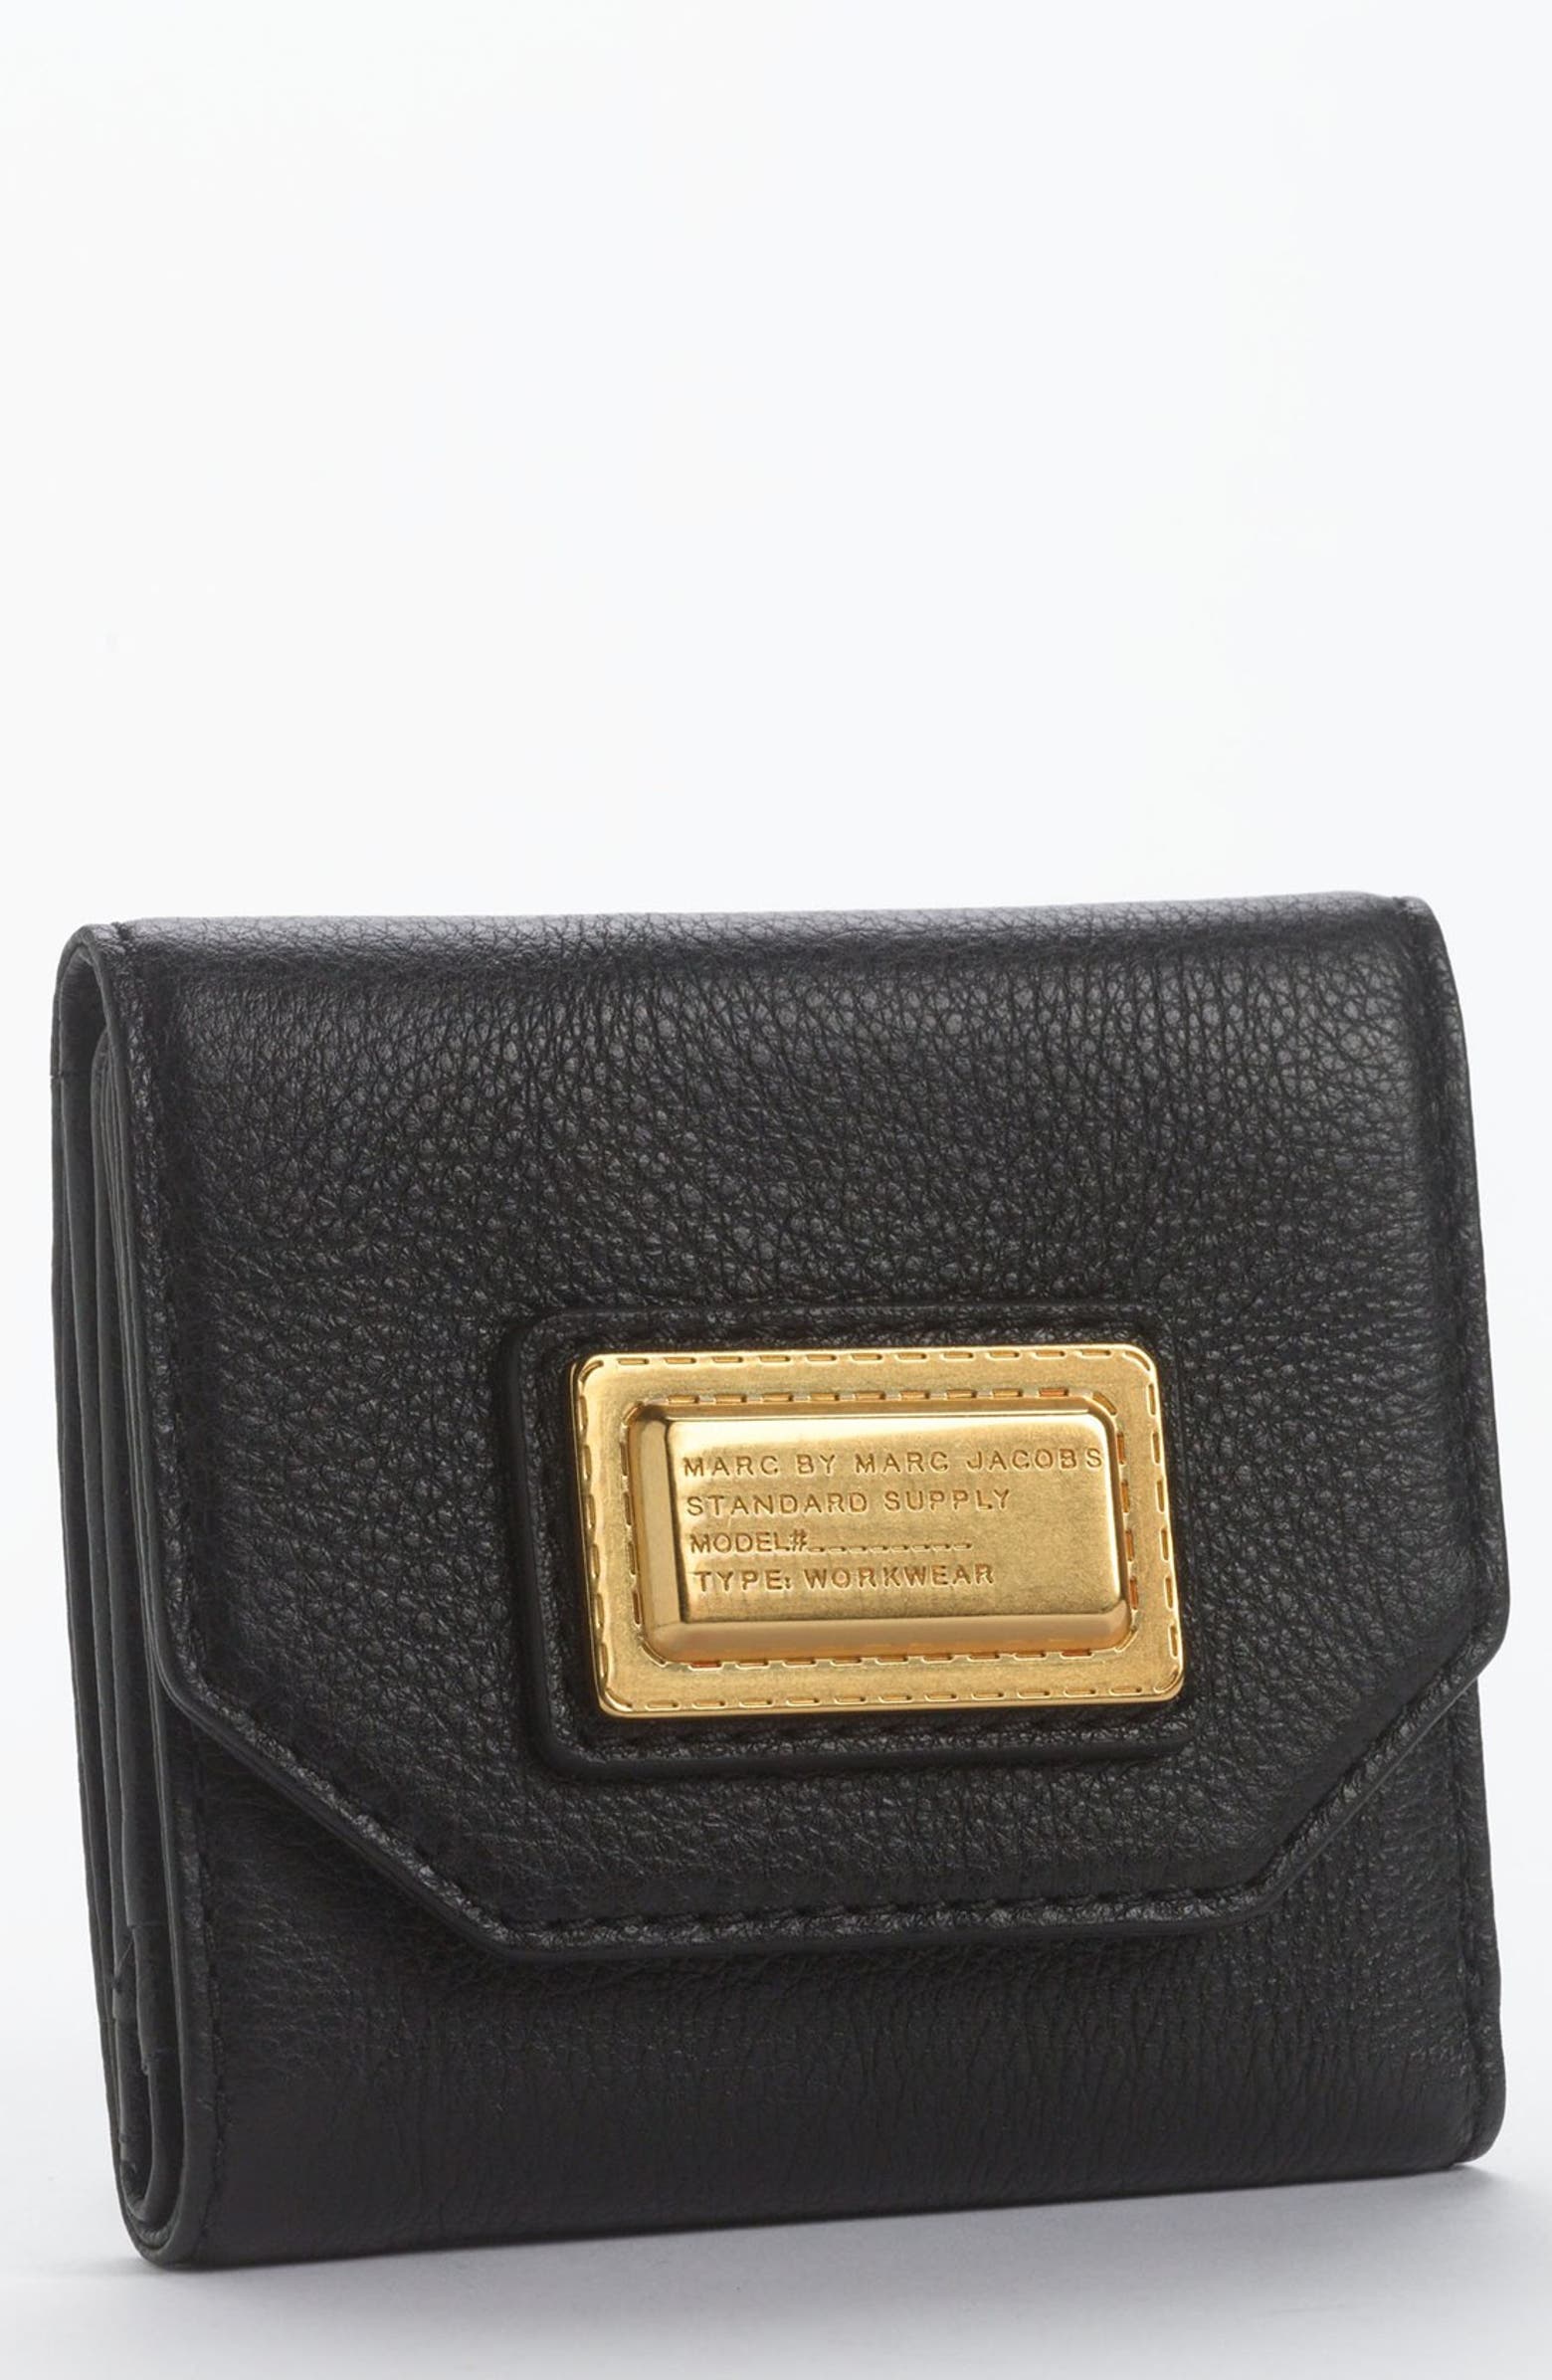 MARC BY MARC JACOBS Bifold French Wallet | Nordstrom